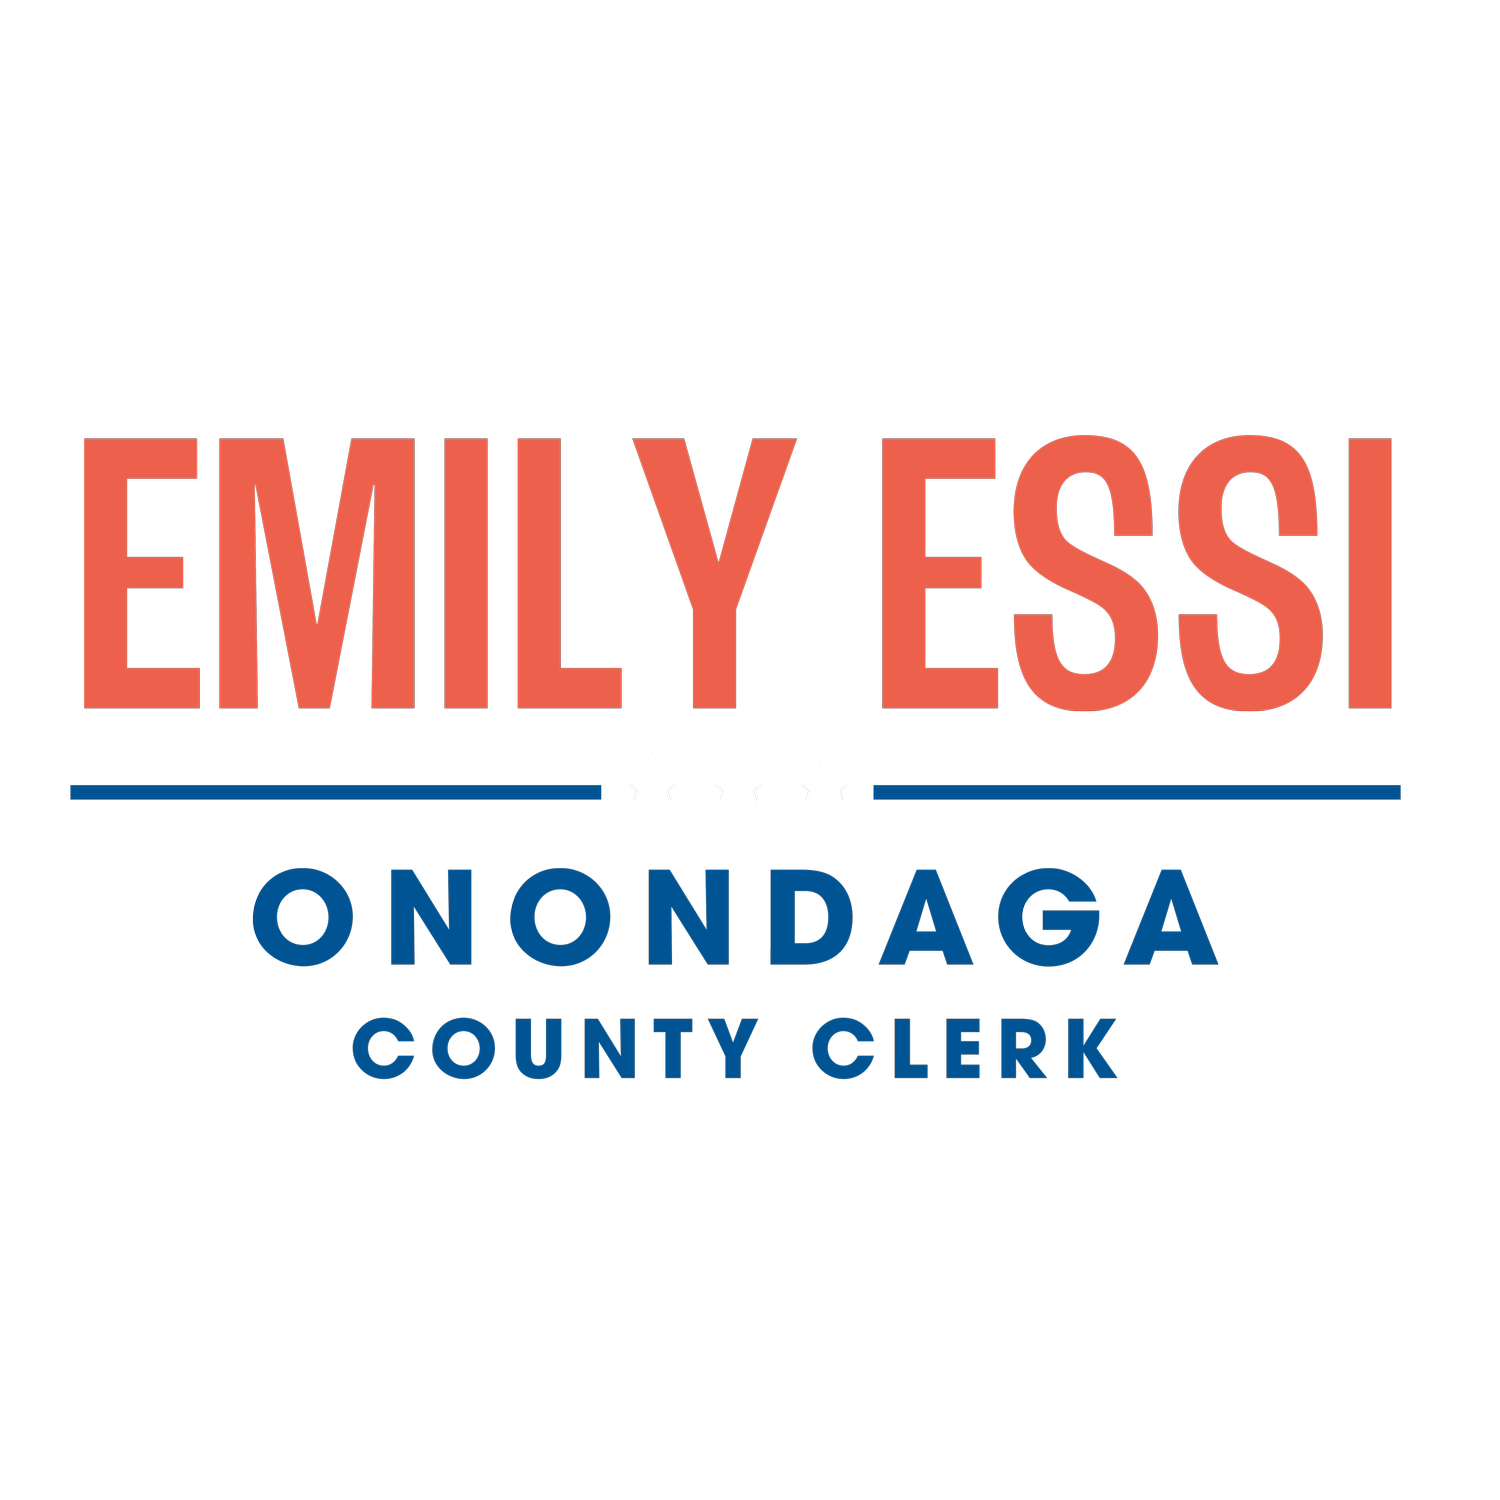 Emily Essi for County Clerk